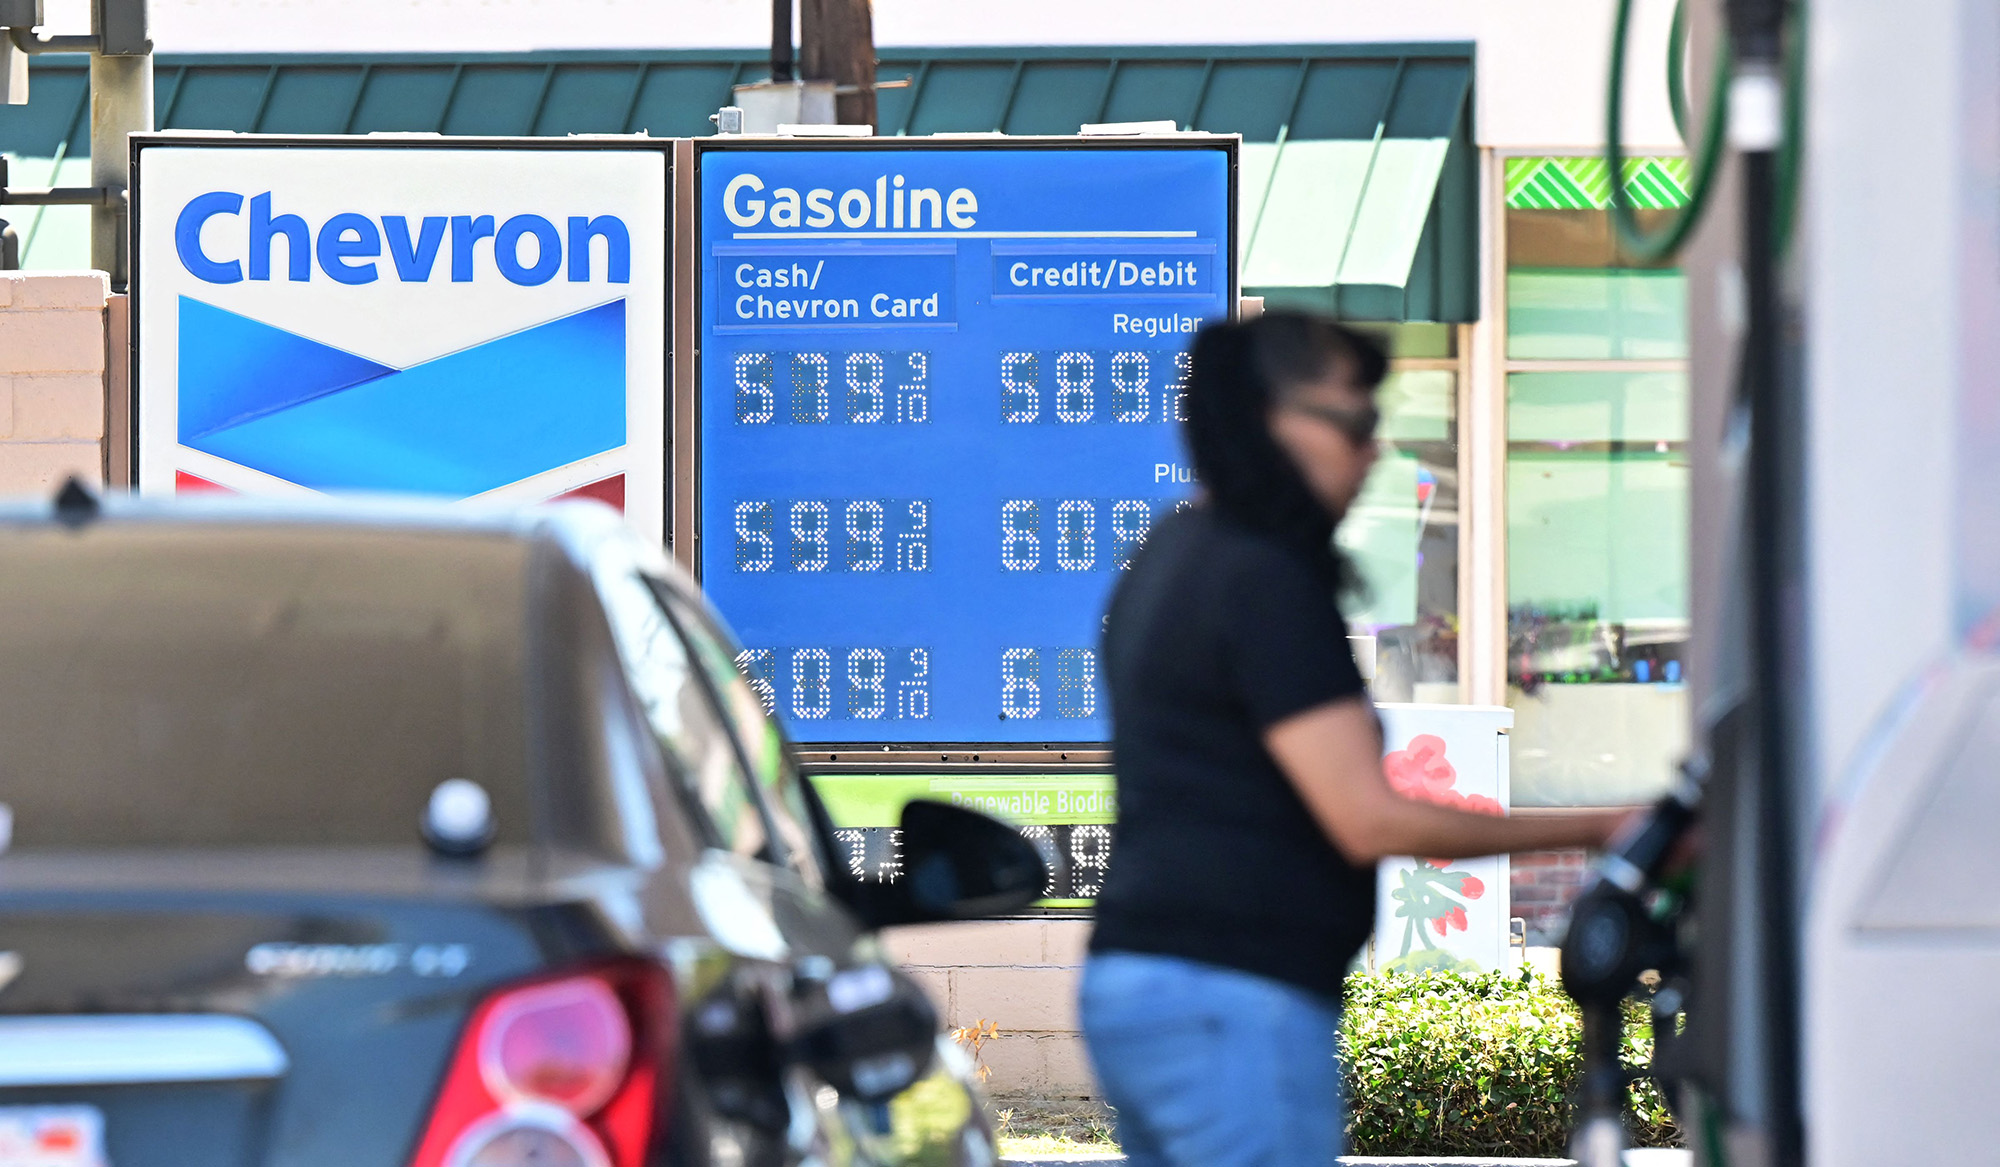 Gas prices are displayed at a petrol station in Monterey Park, California, on July 19.